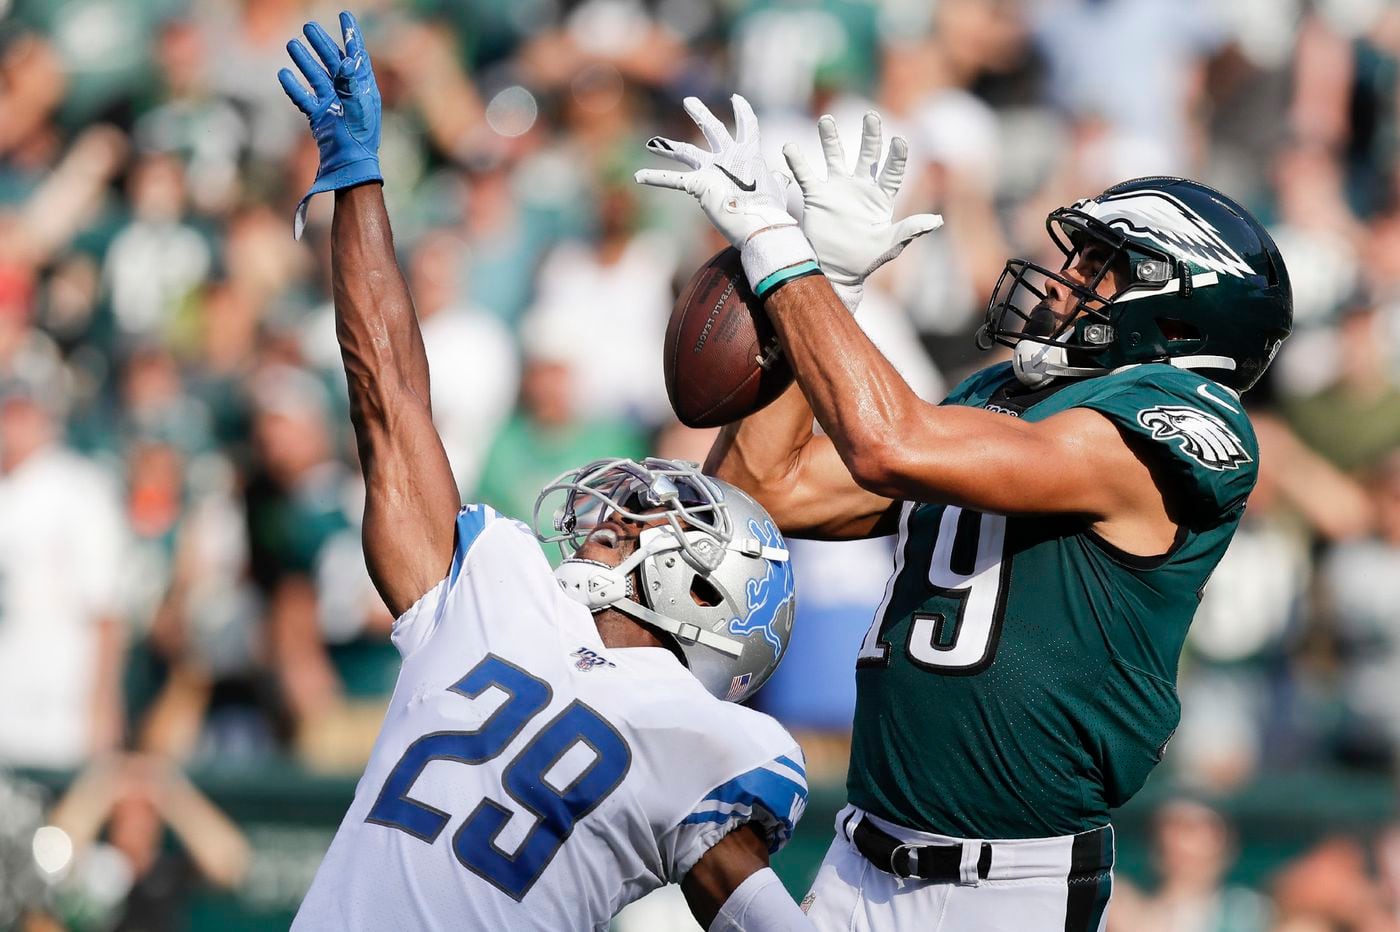 Eagles’ wide receivers coach Dropped passes are ‘totally unacceptable’